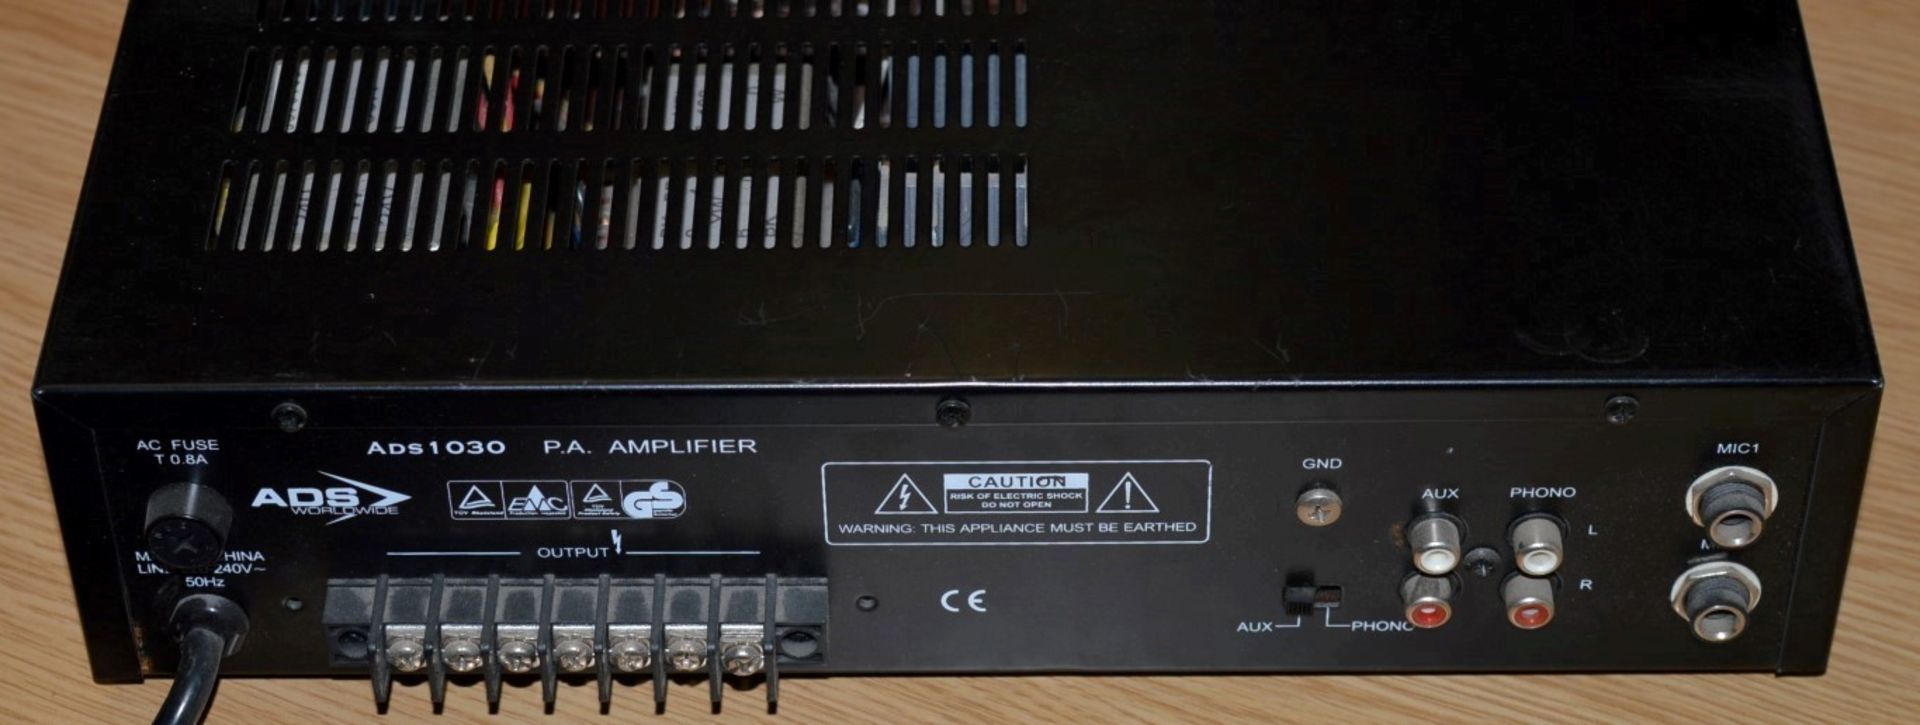 1 x ADS 1030 - 30W 100V PA Amplifier - Working Order - CL011 - Location: Altrincham WA14 - RRP £ - Image 2 of 3